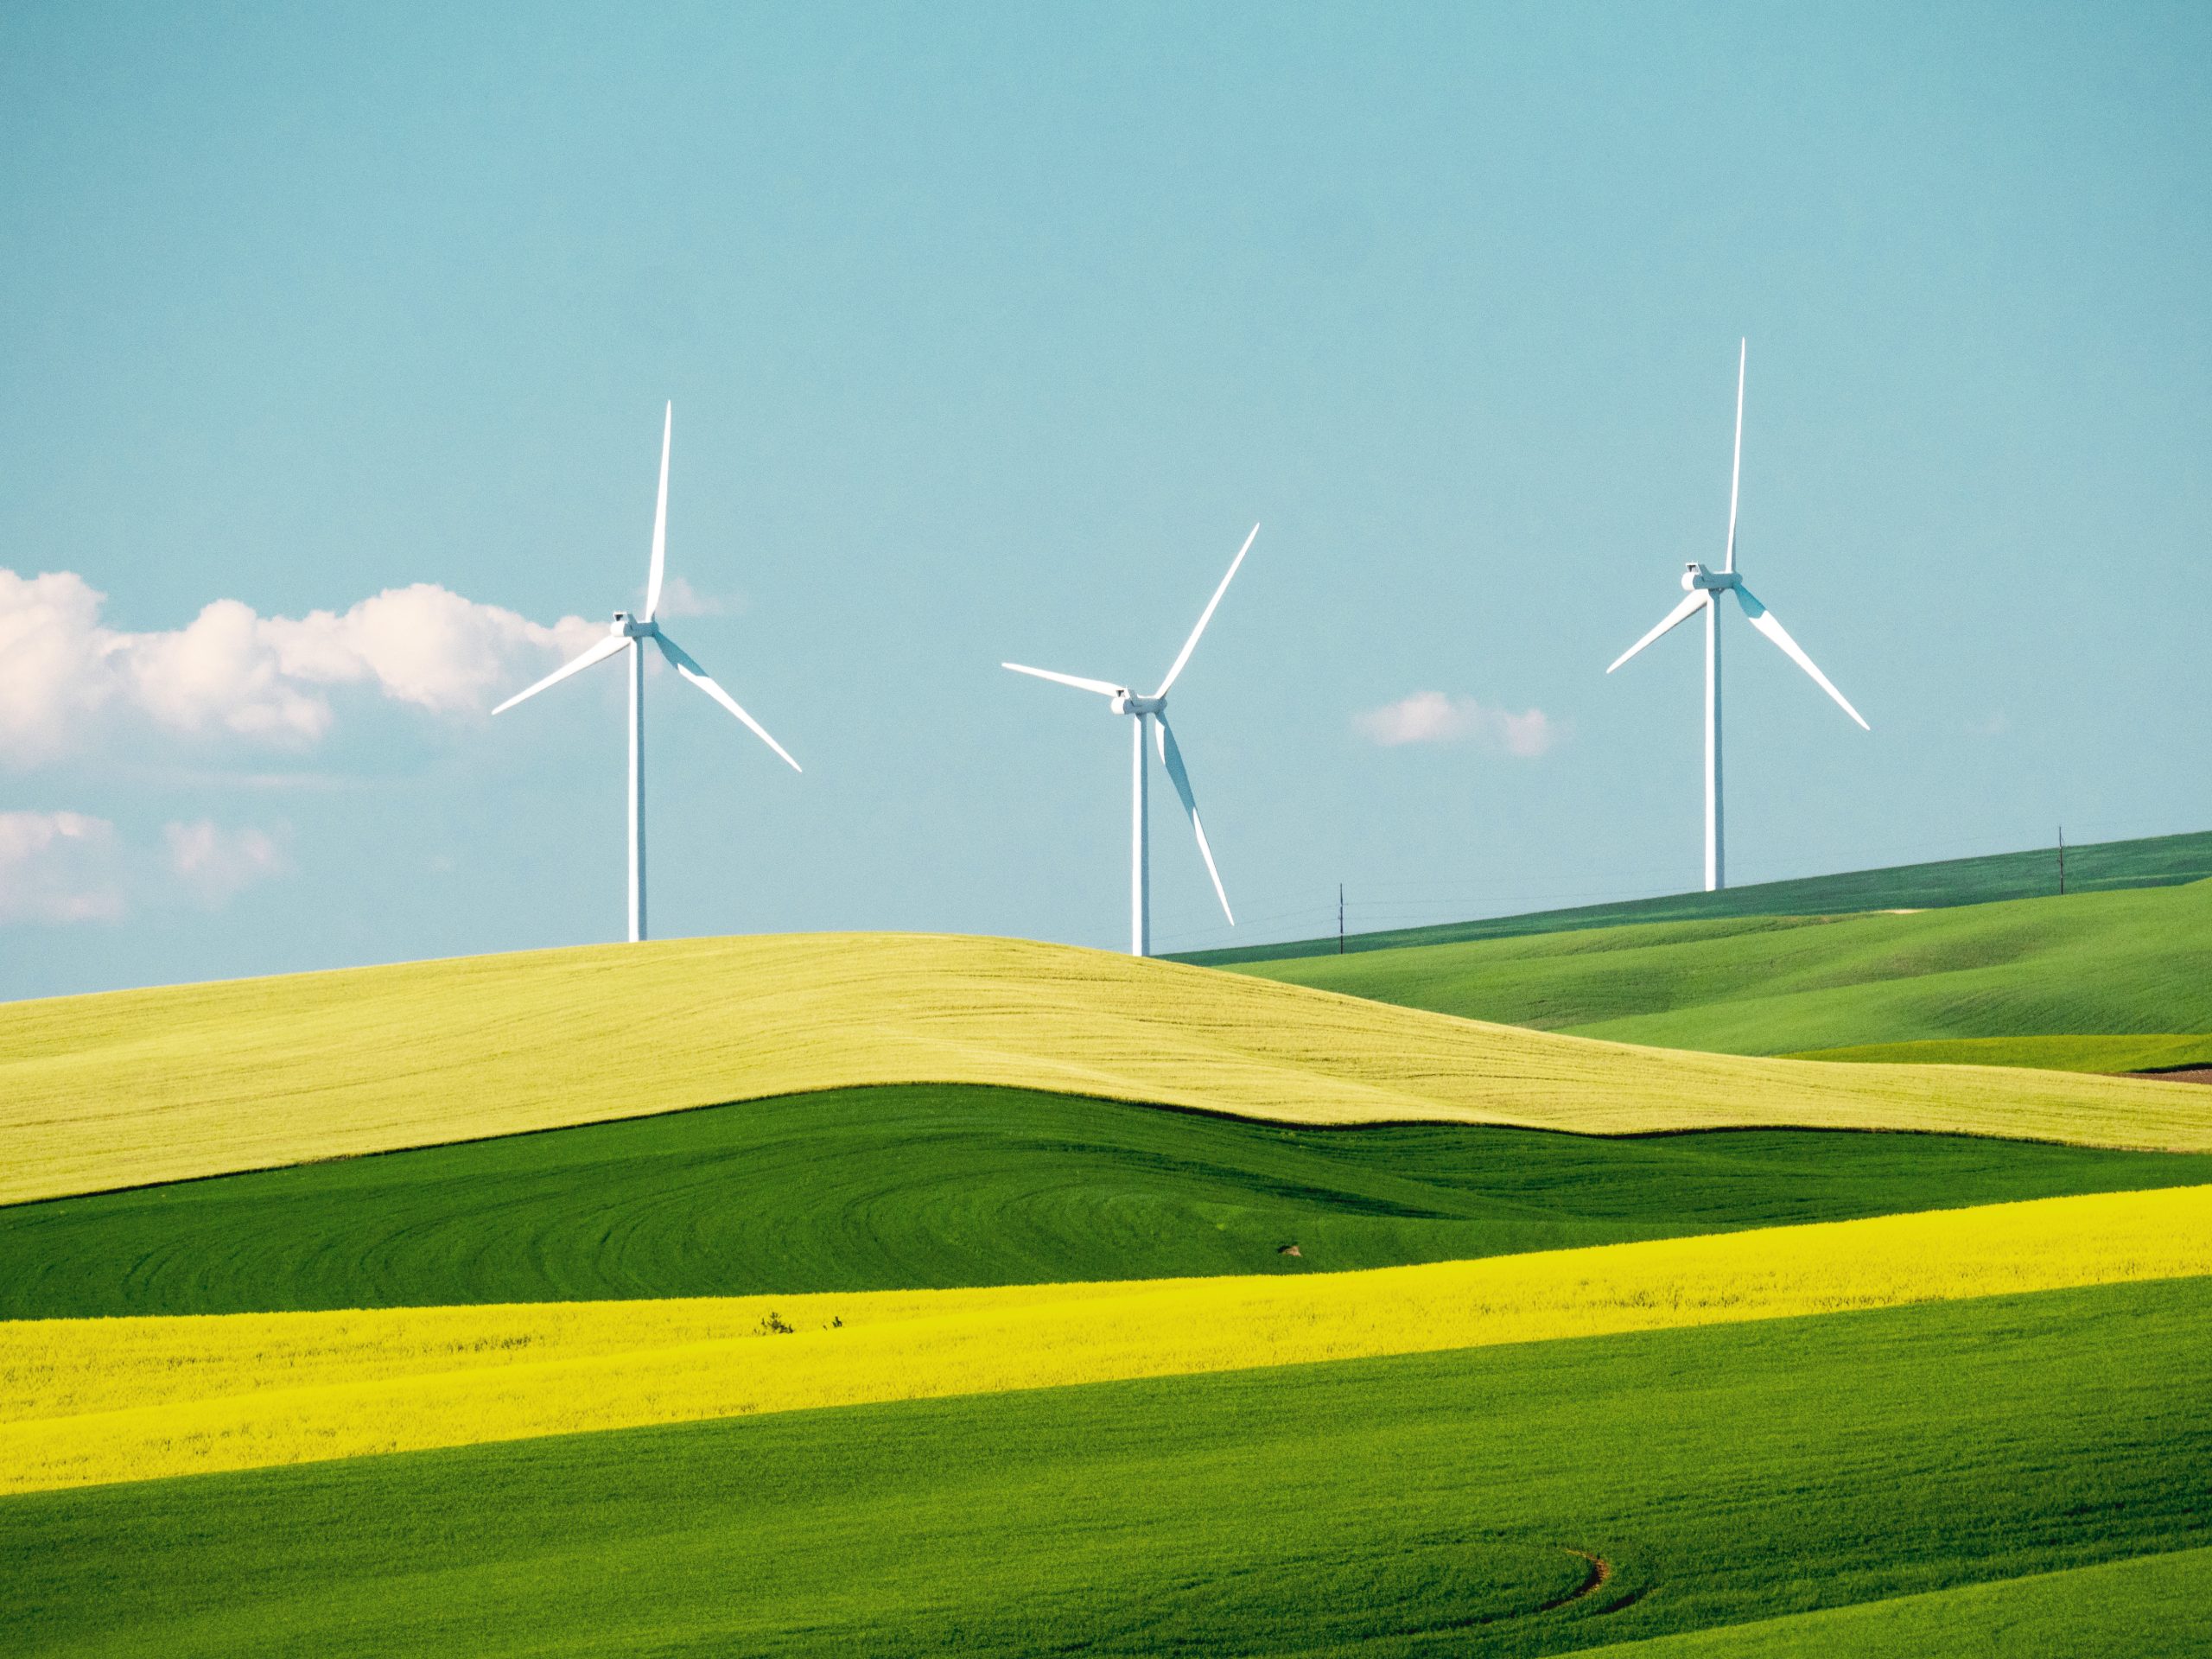 Windmills on a yellow and green field